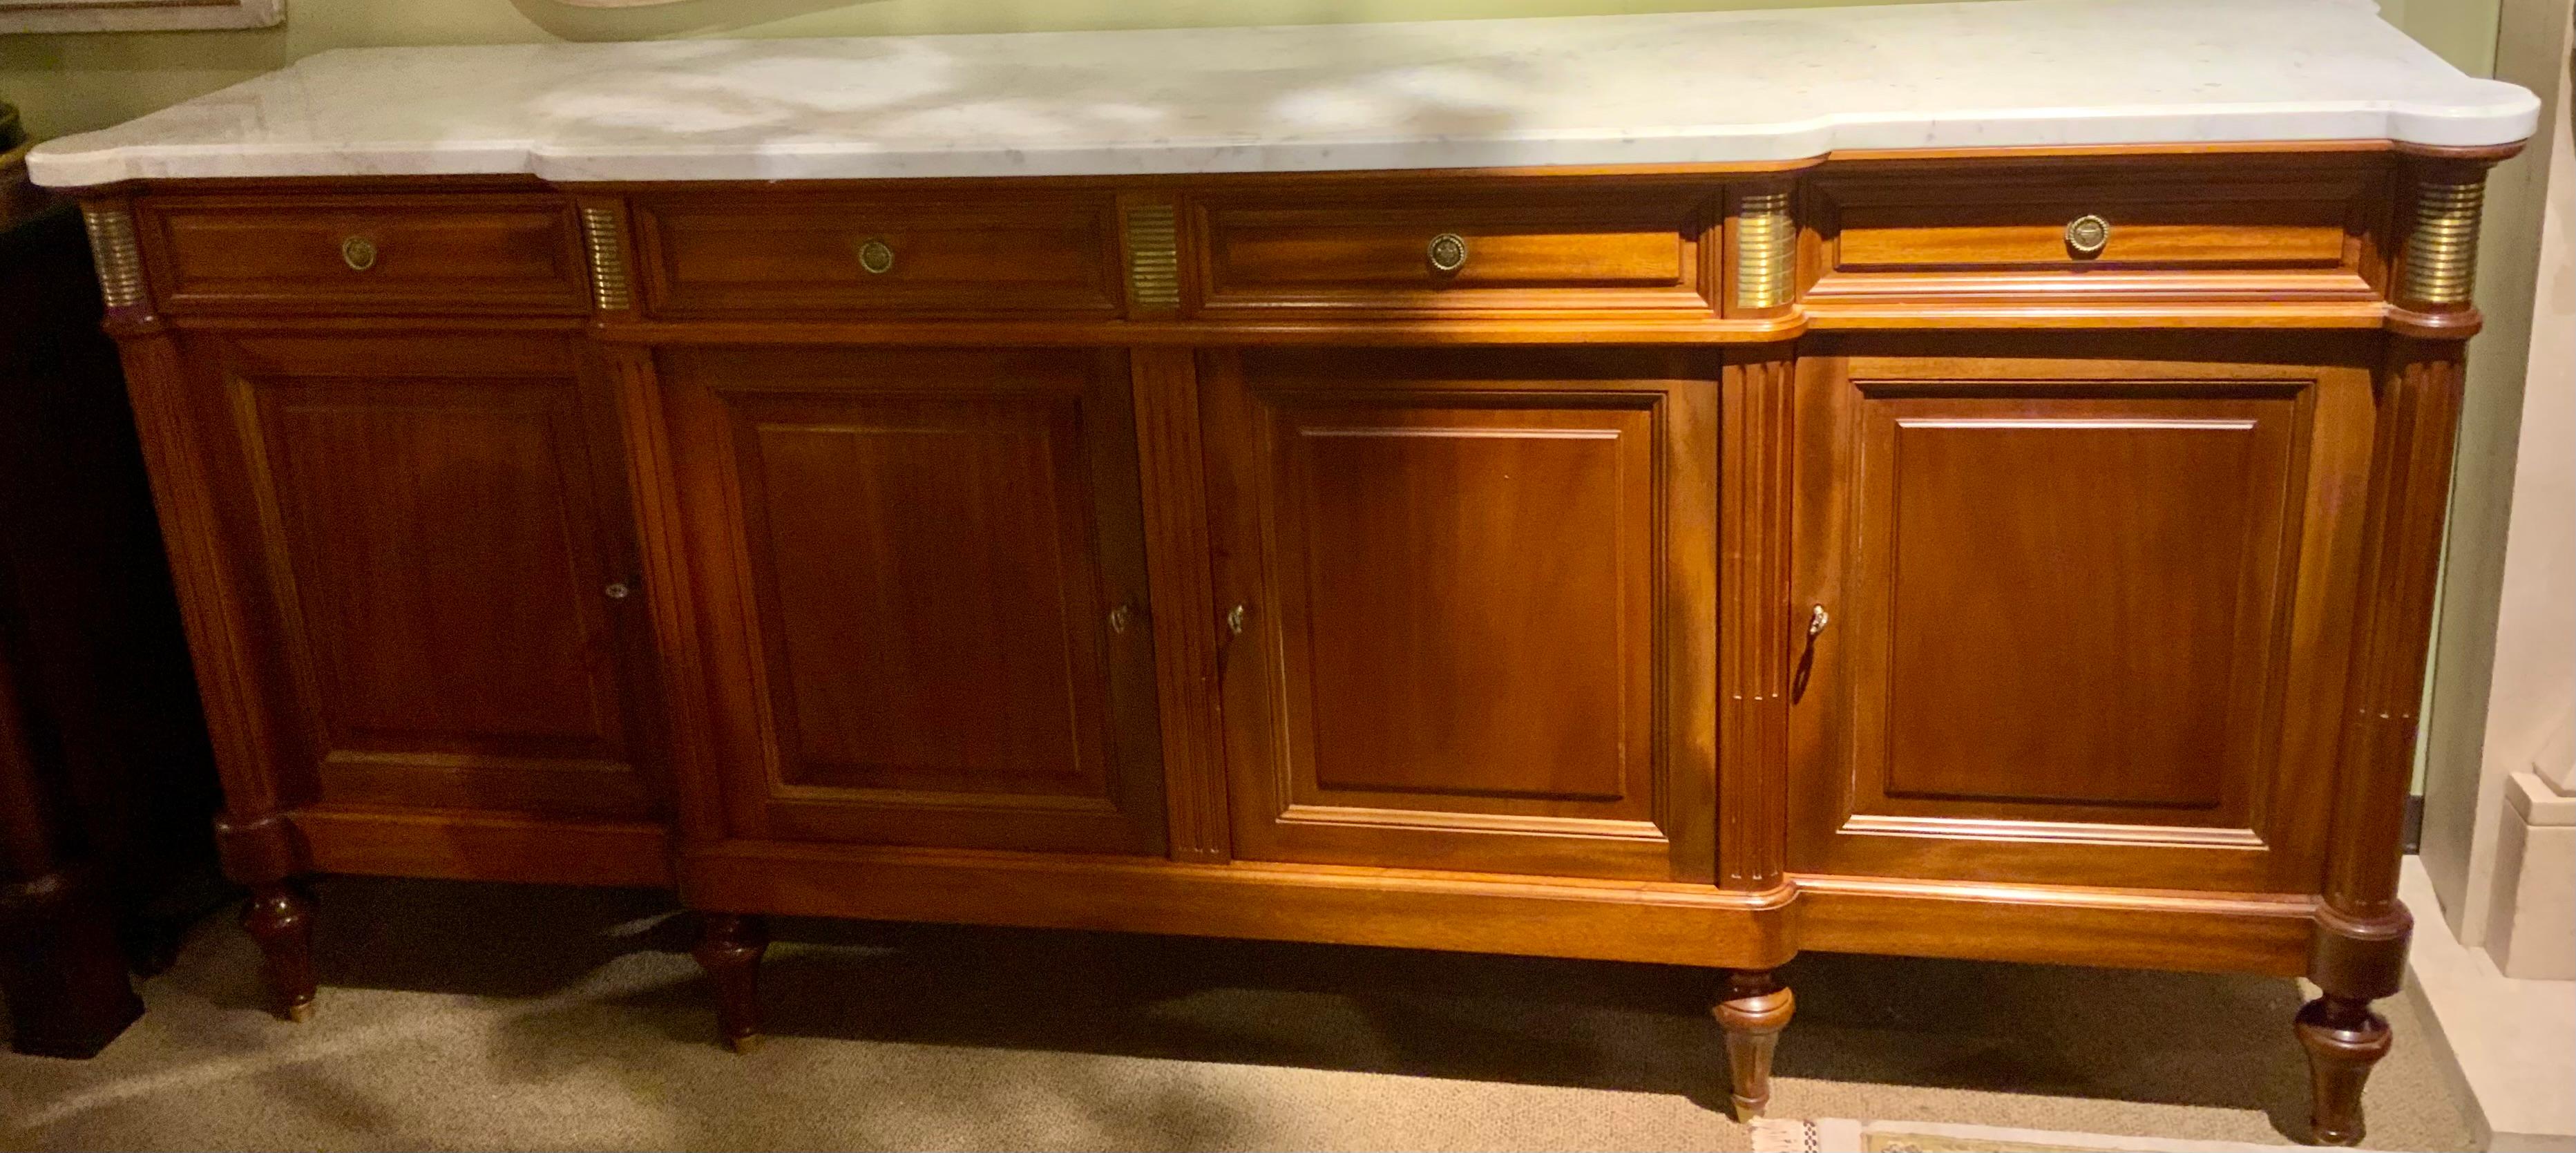 This piece has beautiful and simple lines. It is made of very
Fine mahogany and has a clean white marble with pale
Gray veining. It is in fine condition and has no flaws or
Problems with the finish. All drawers open easily and the
Doors open freely